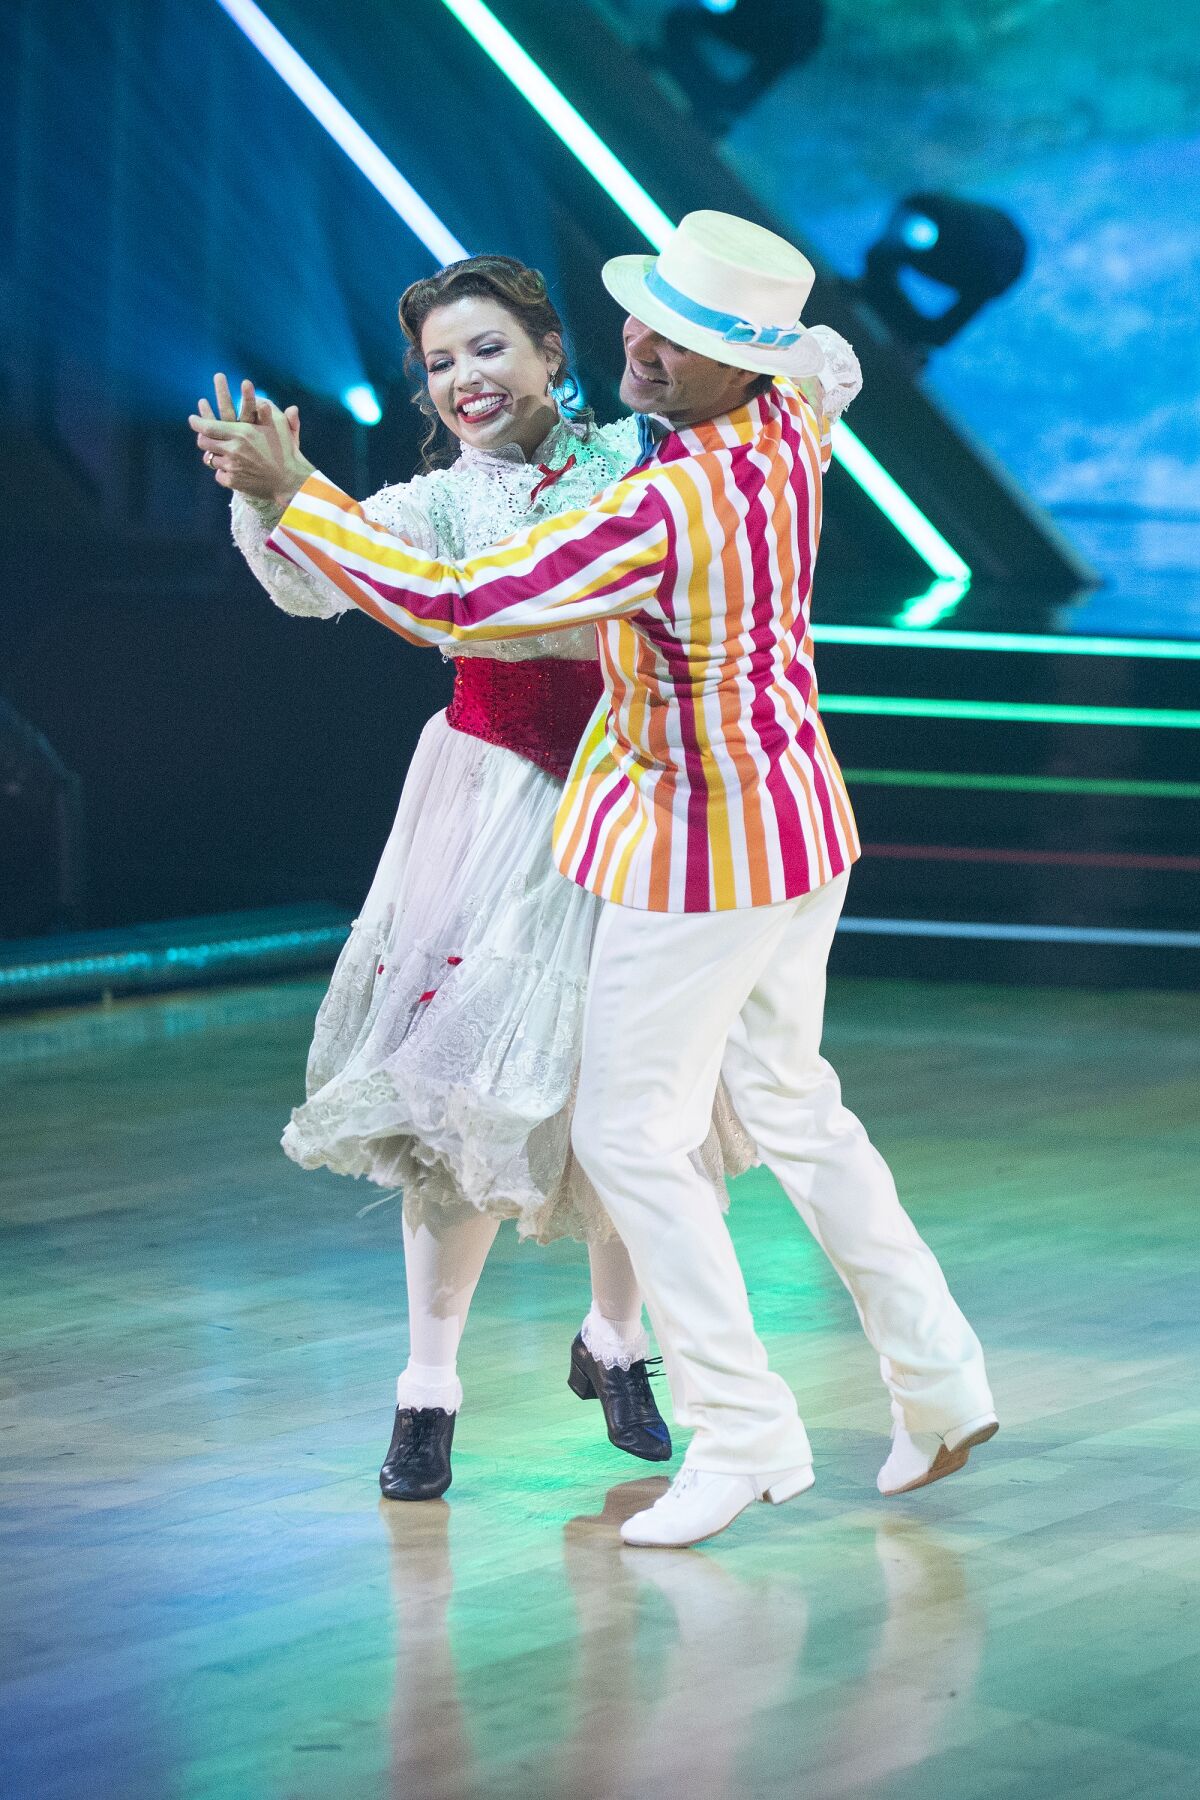 Justina Machado and Sasha Farber compete in the Disney-themed episode of "Dancing With the Stars."